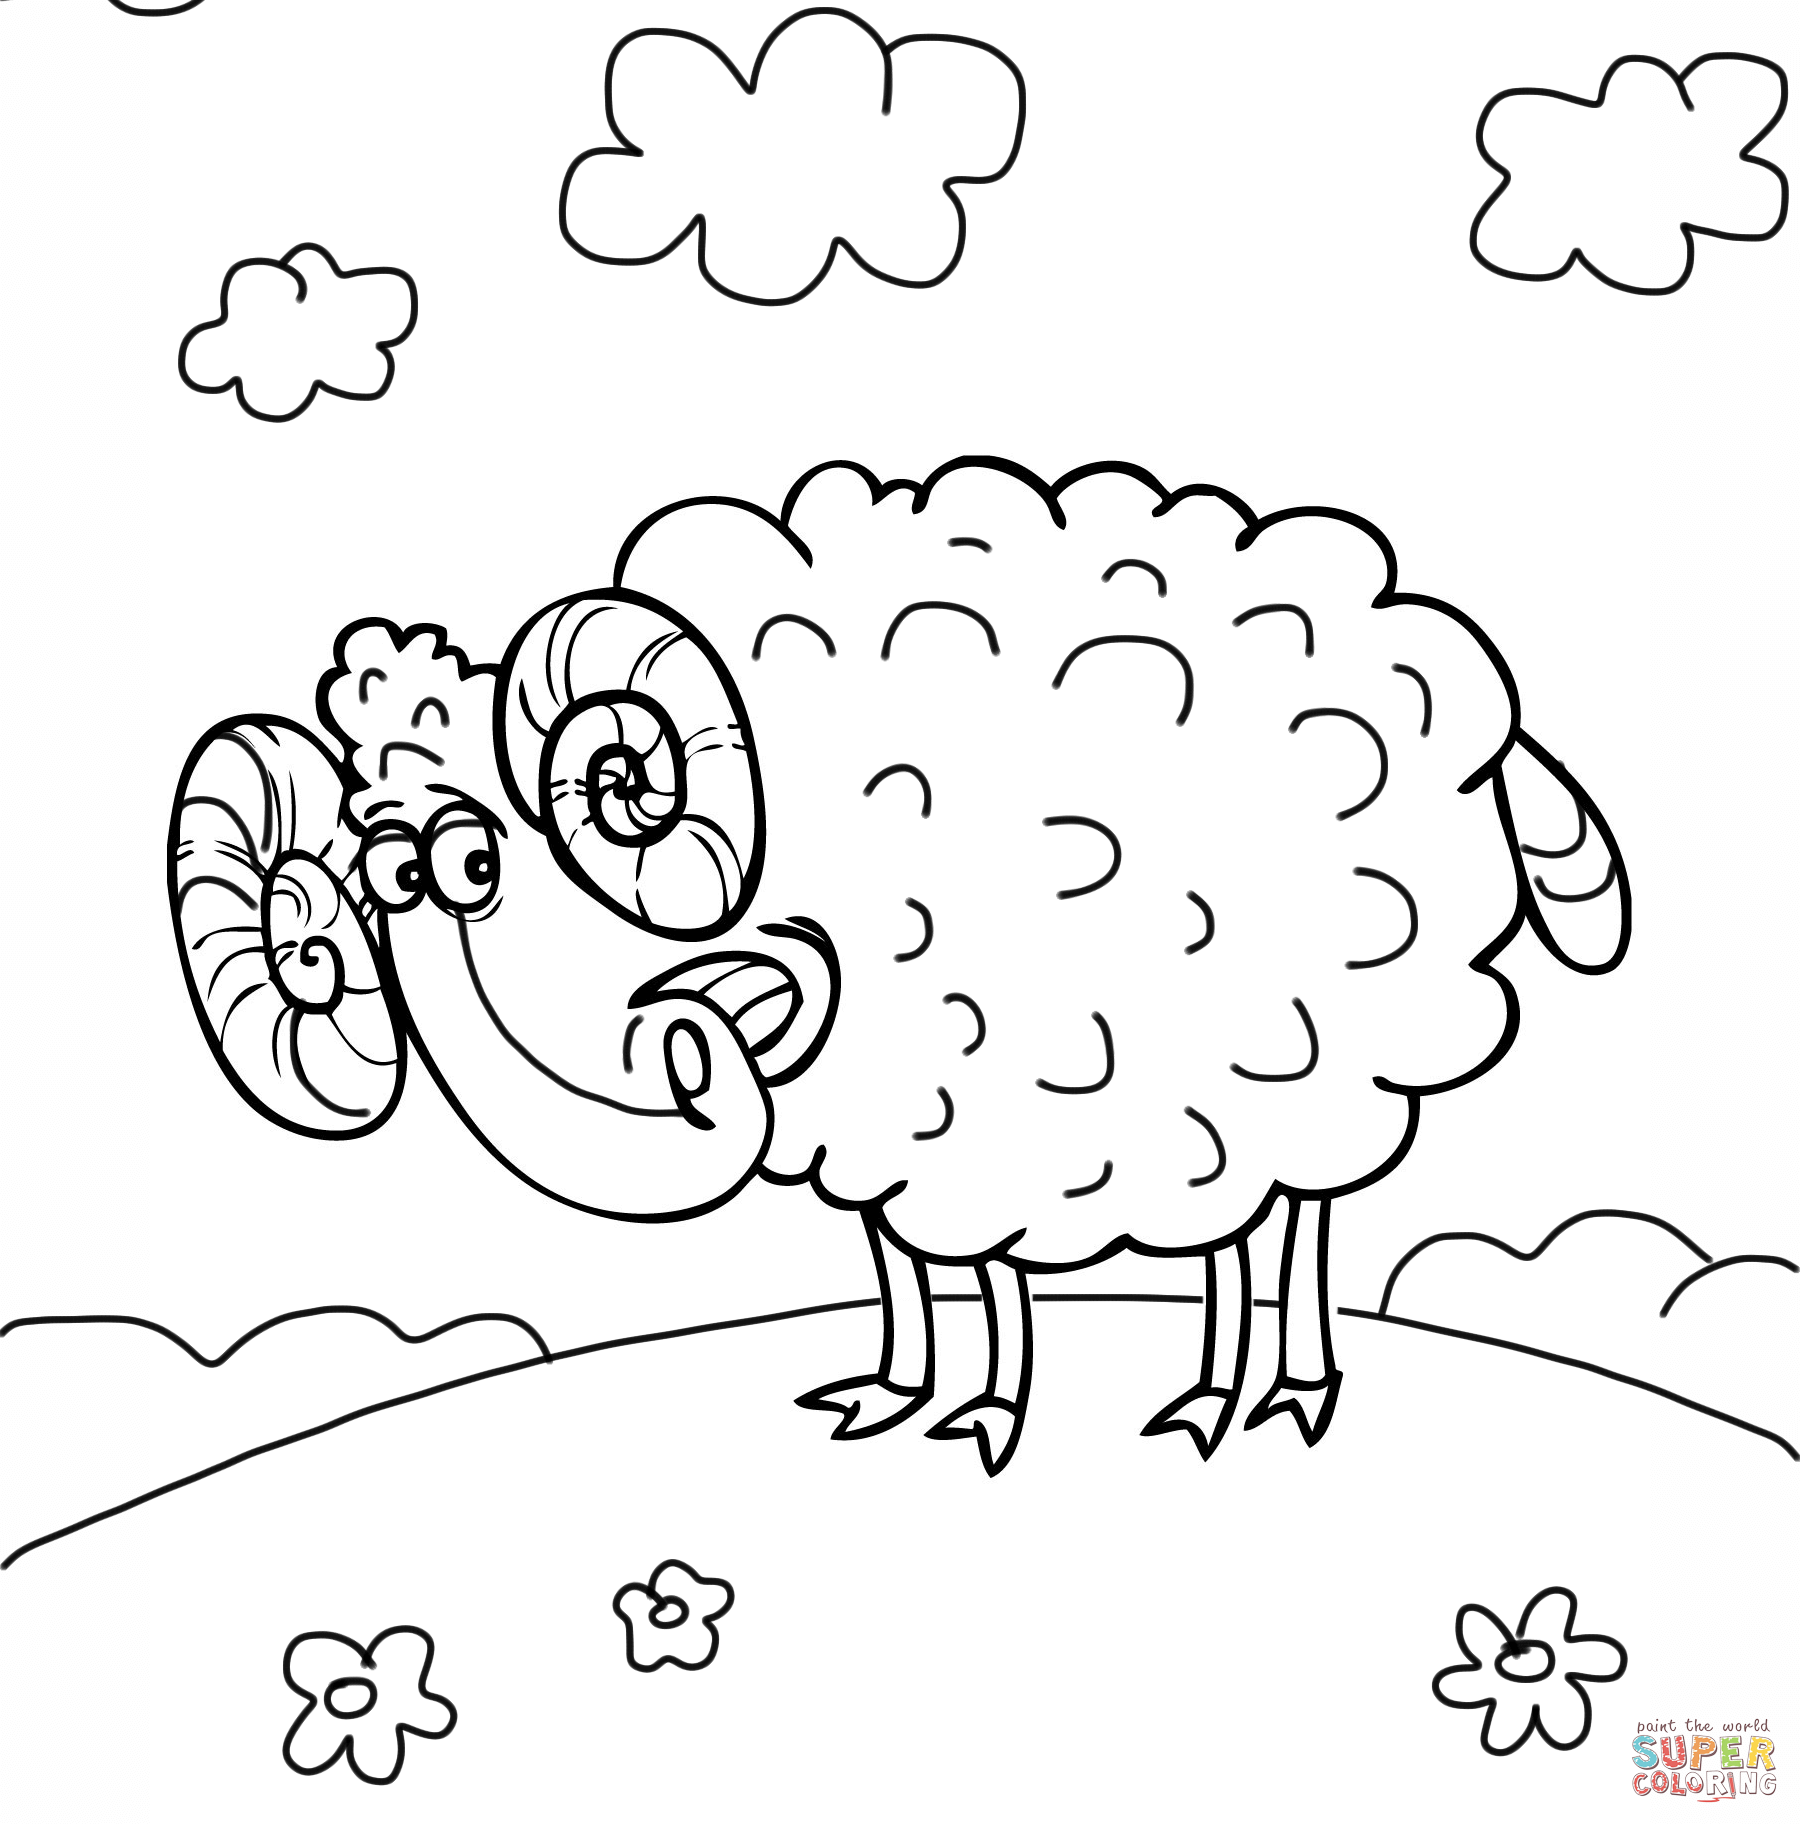 Cute ram coloring page free printable coloring pages